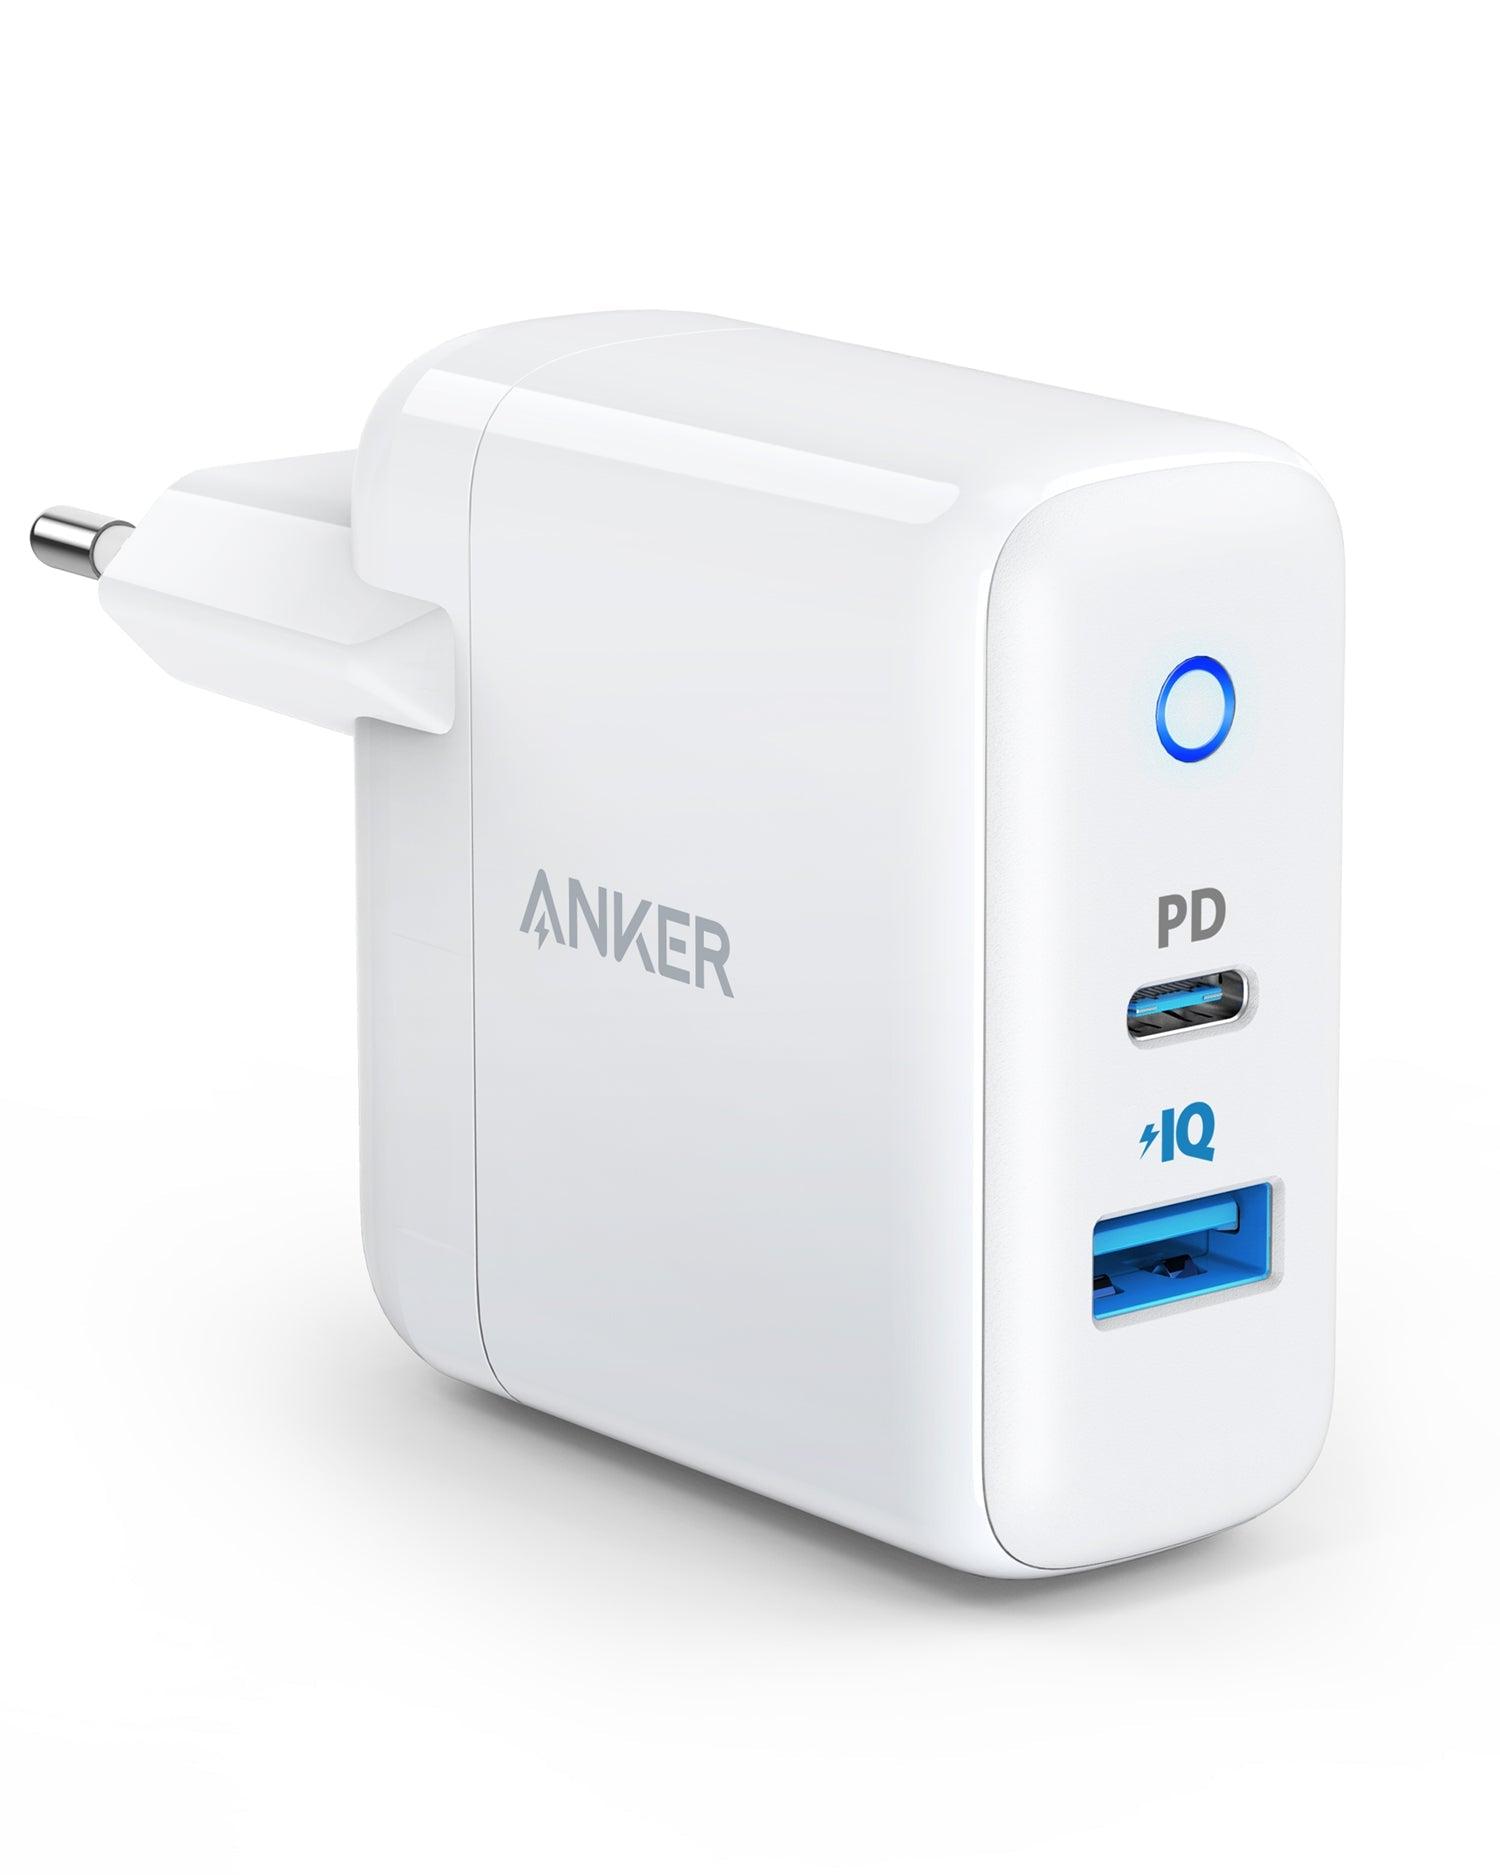 Anker <b>323</b> Charger (32W)